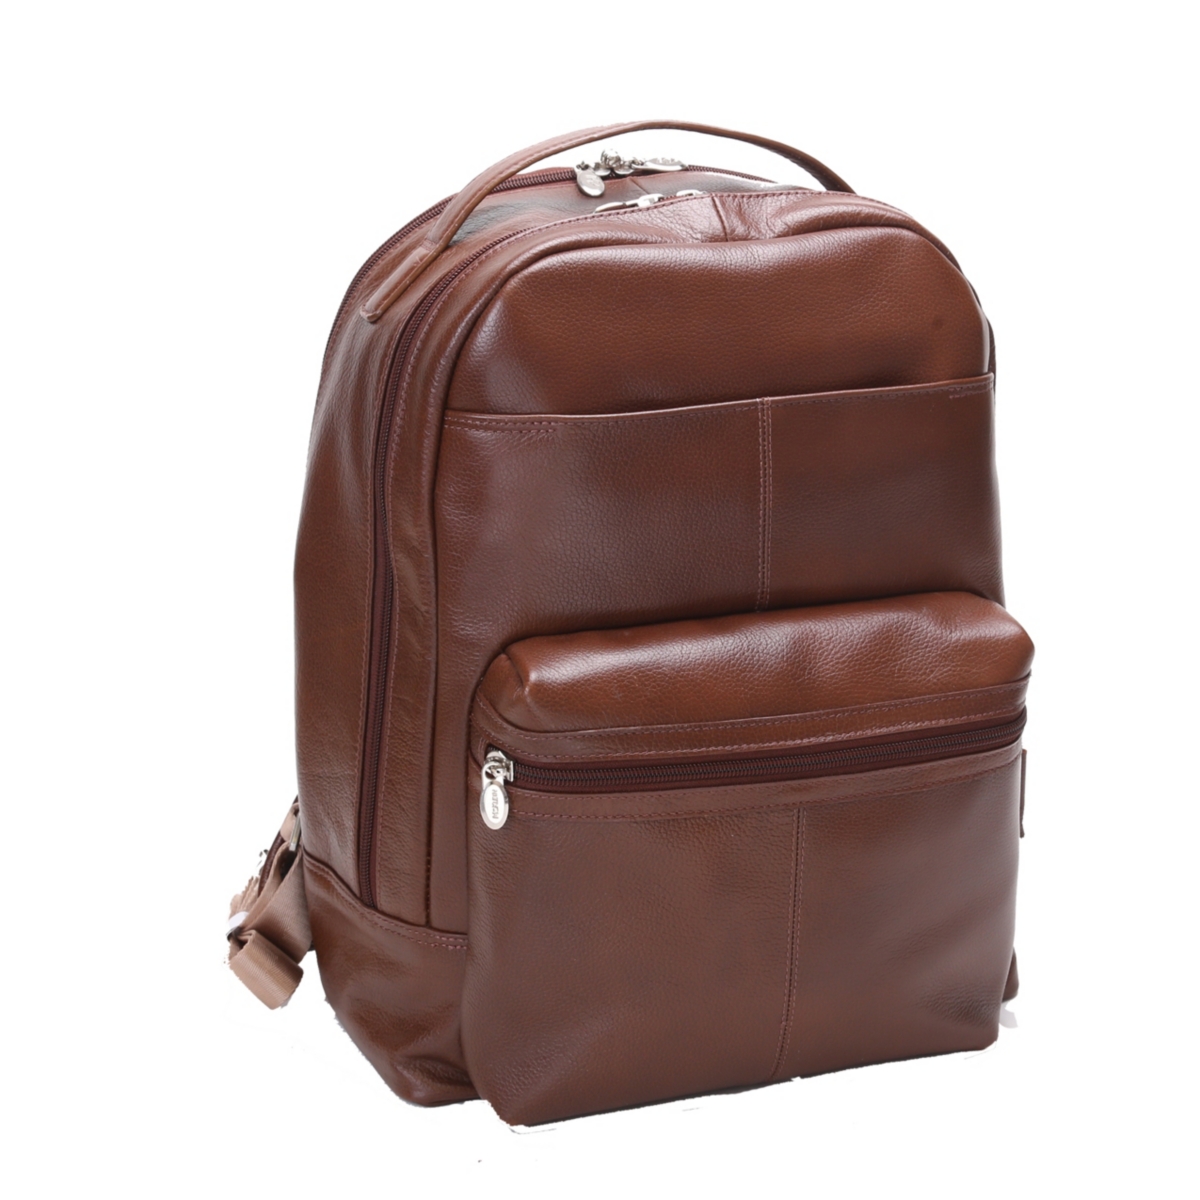 Parker 15" Dual Compartment Laptop Backpack - Brown